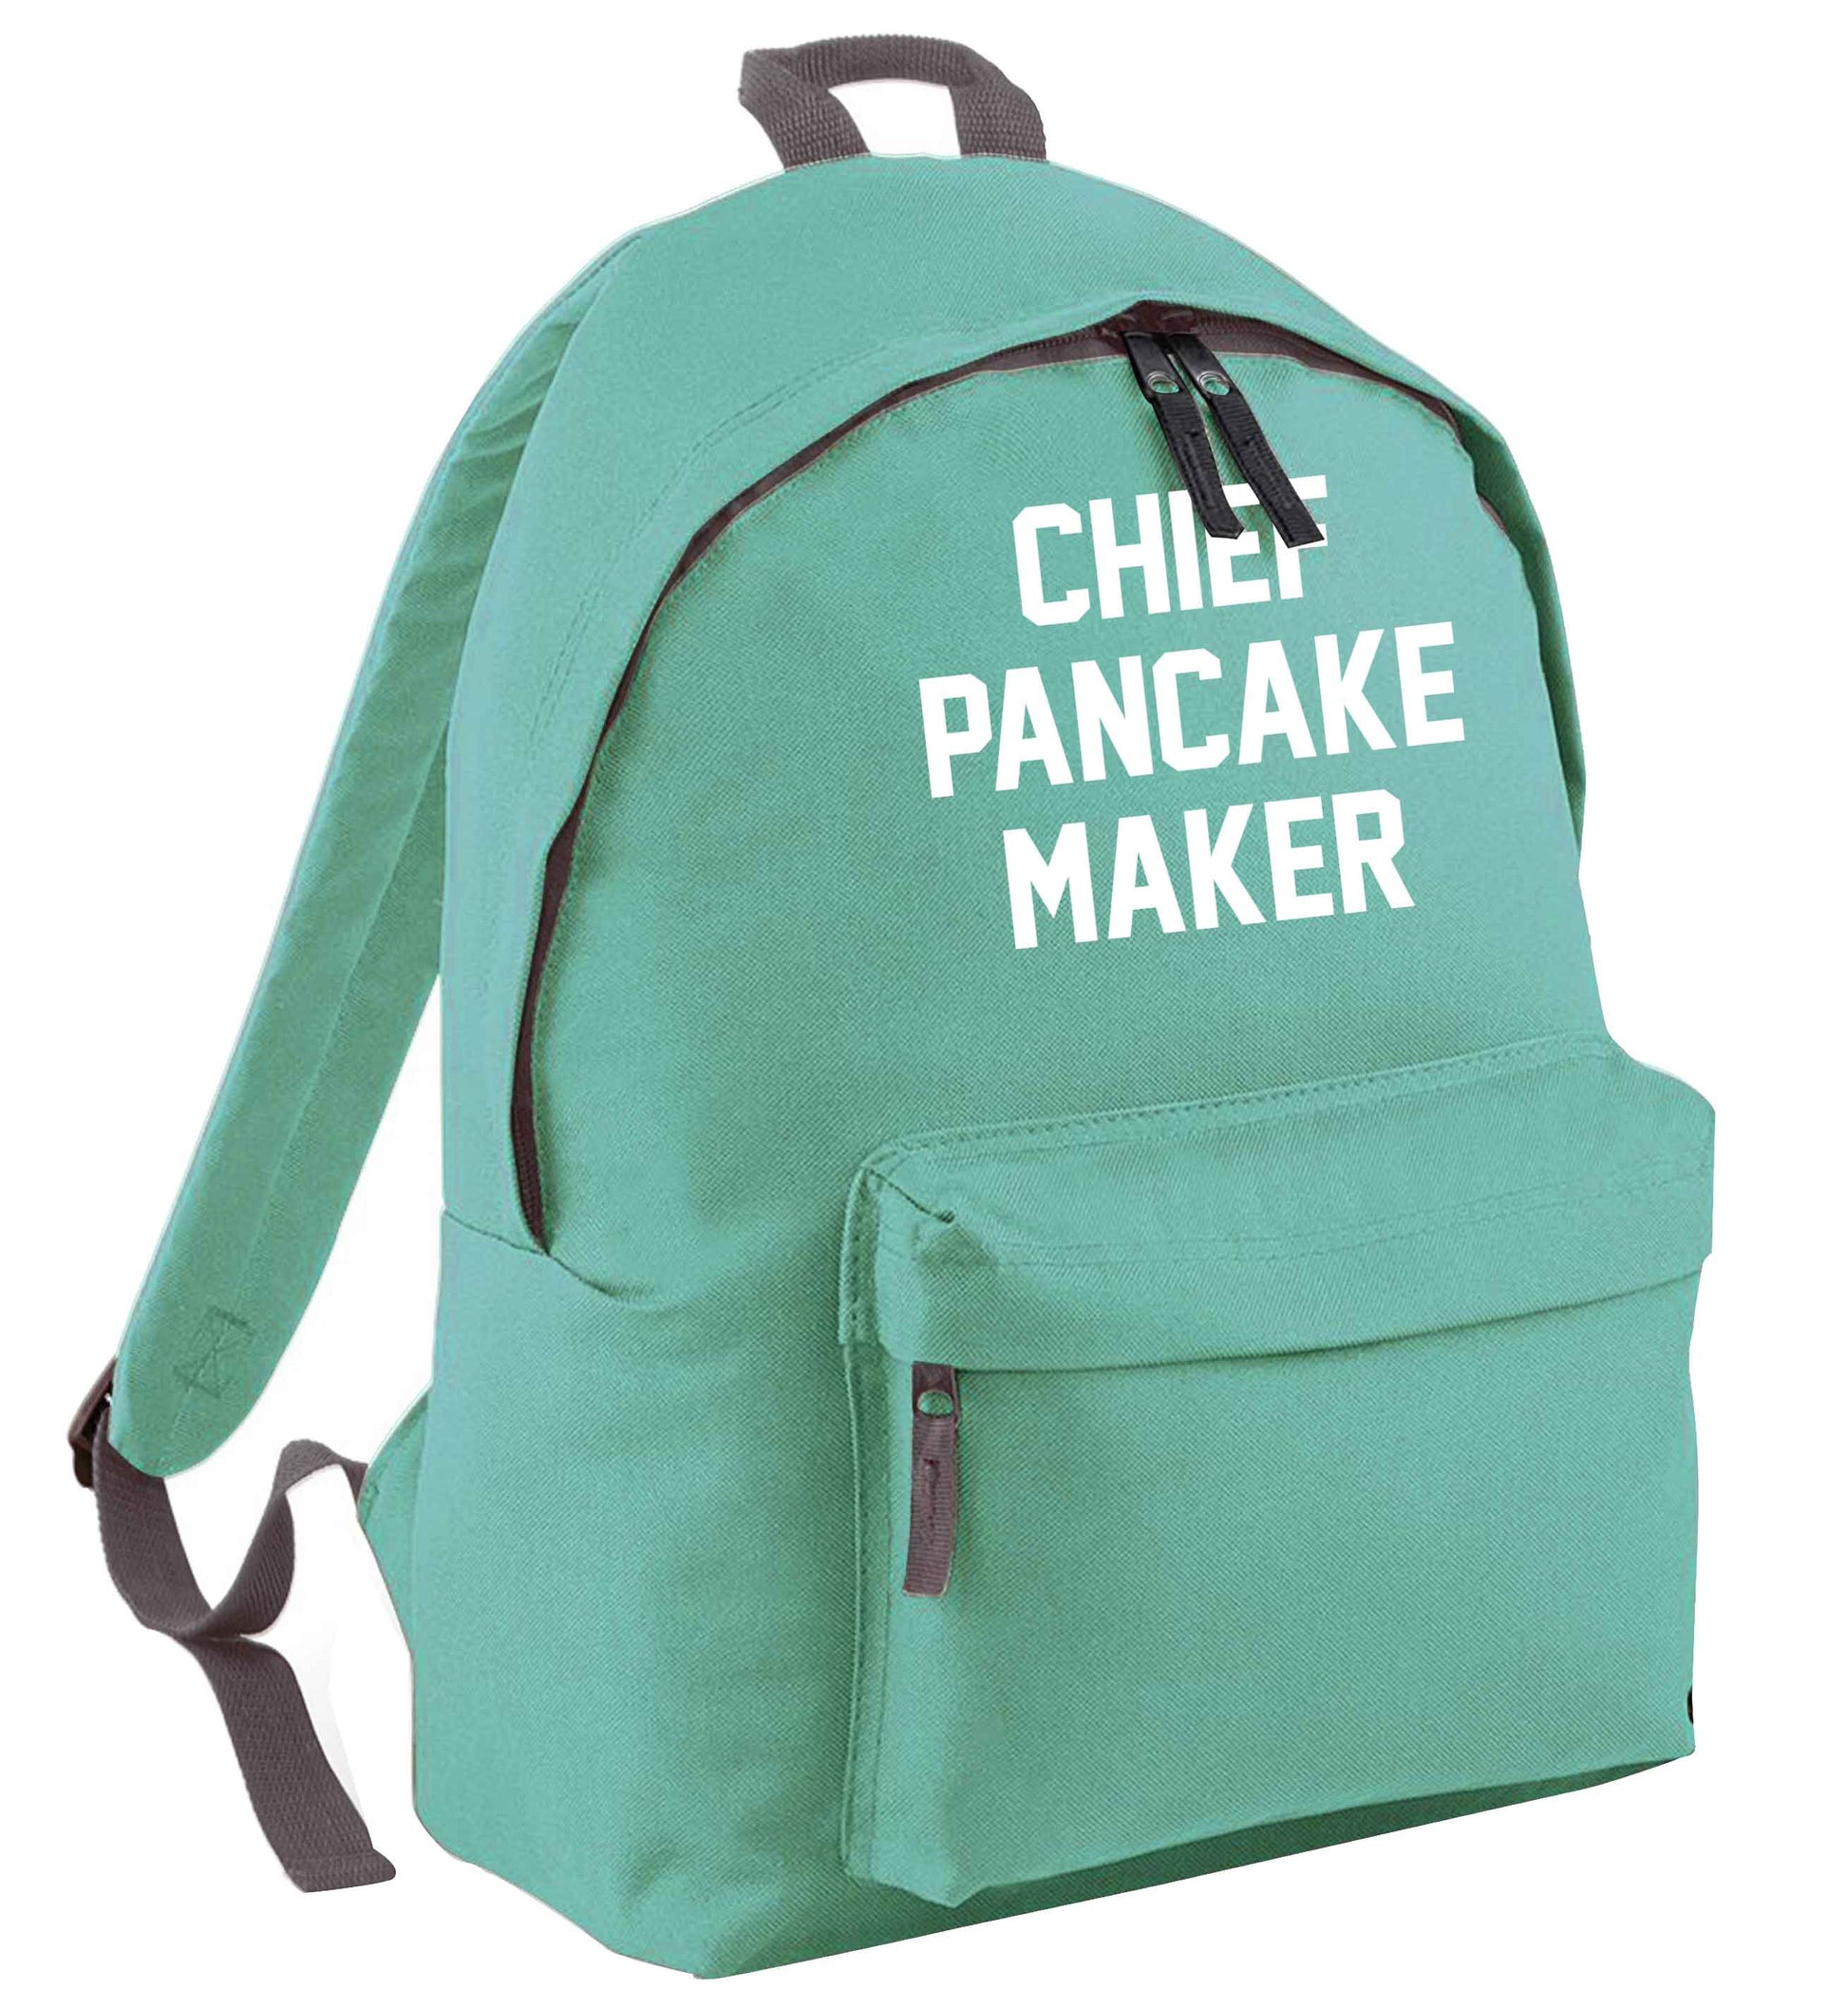 Chief pancake maker mint adults backpack